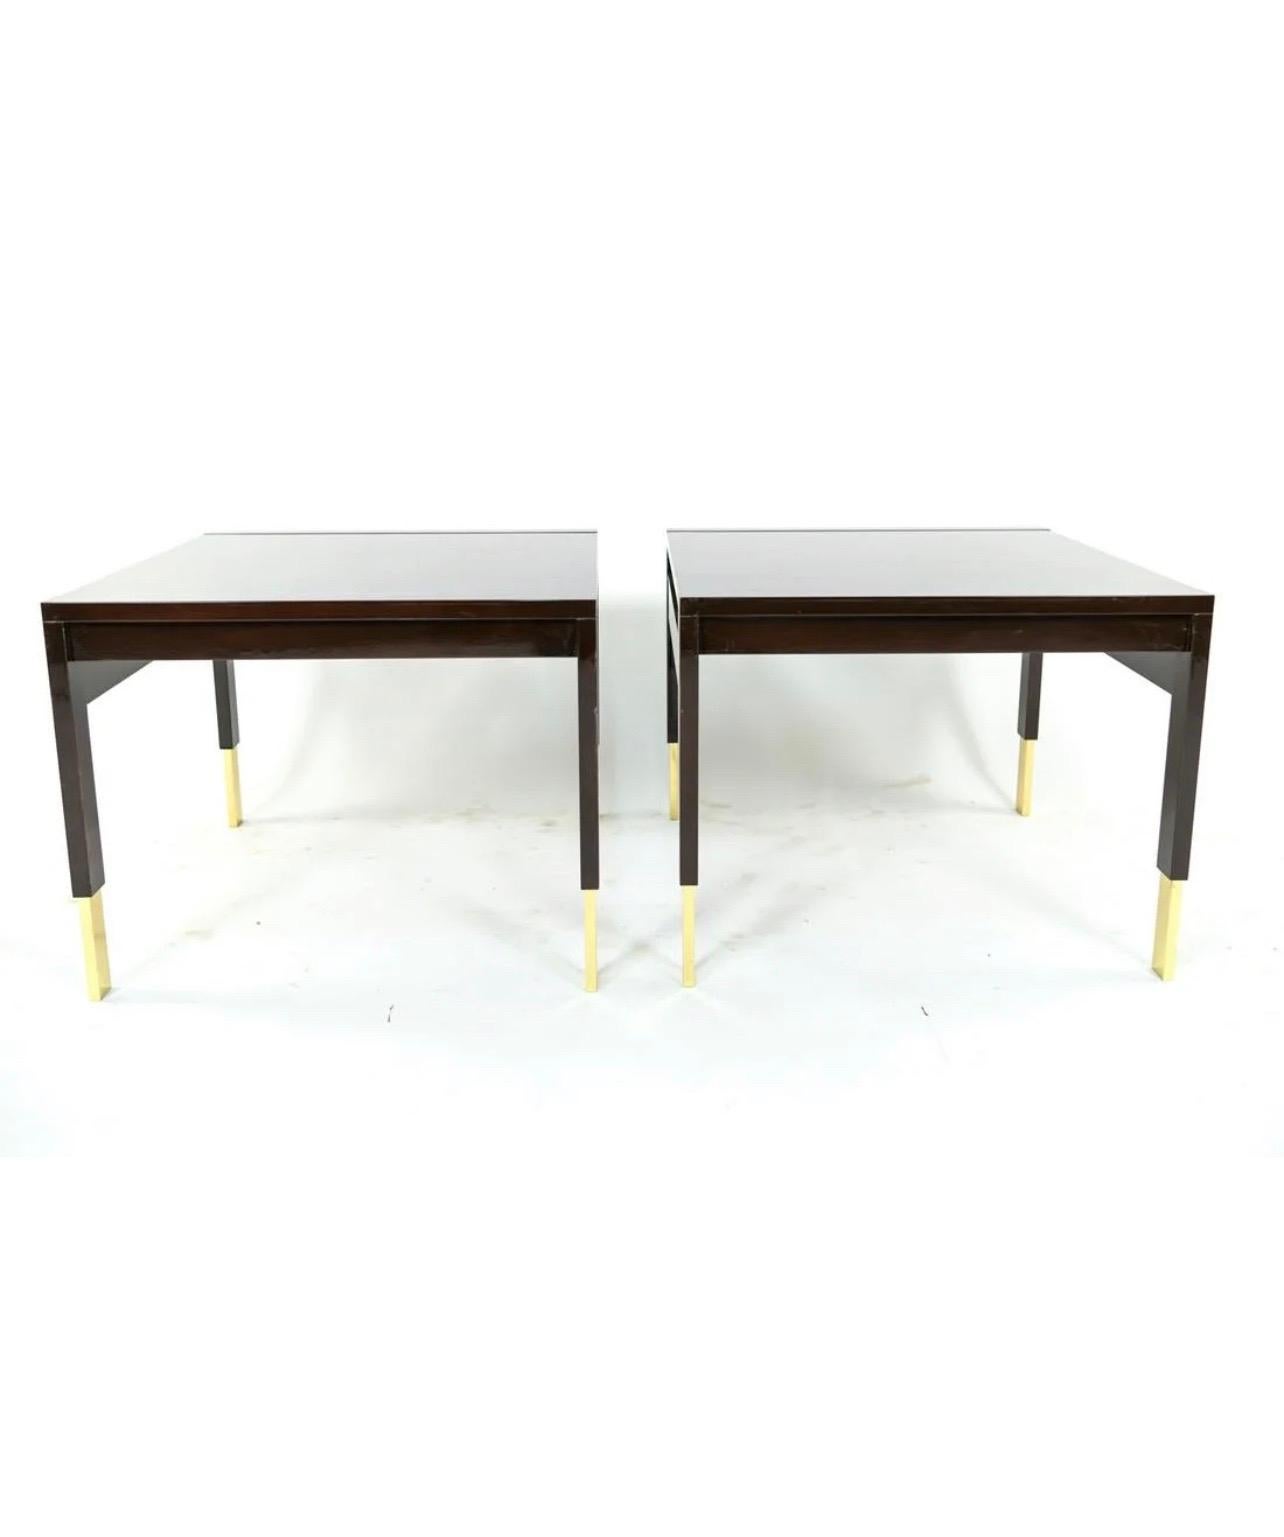 Italian Wonderful Pair of Modern Lorin Marsh Lacquered Wenge Enameled Wood Brass Tables For Sale